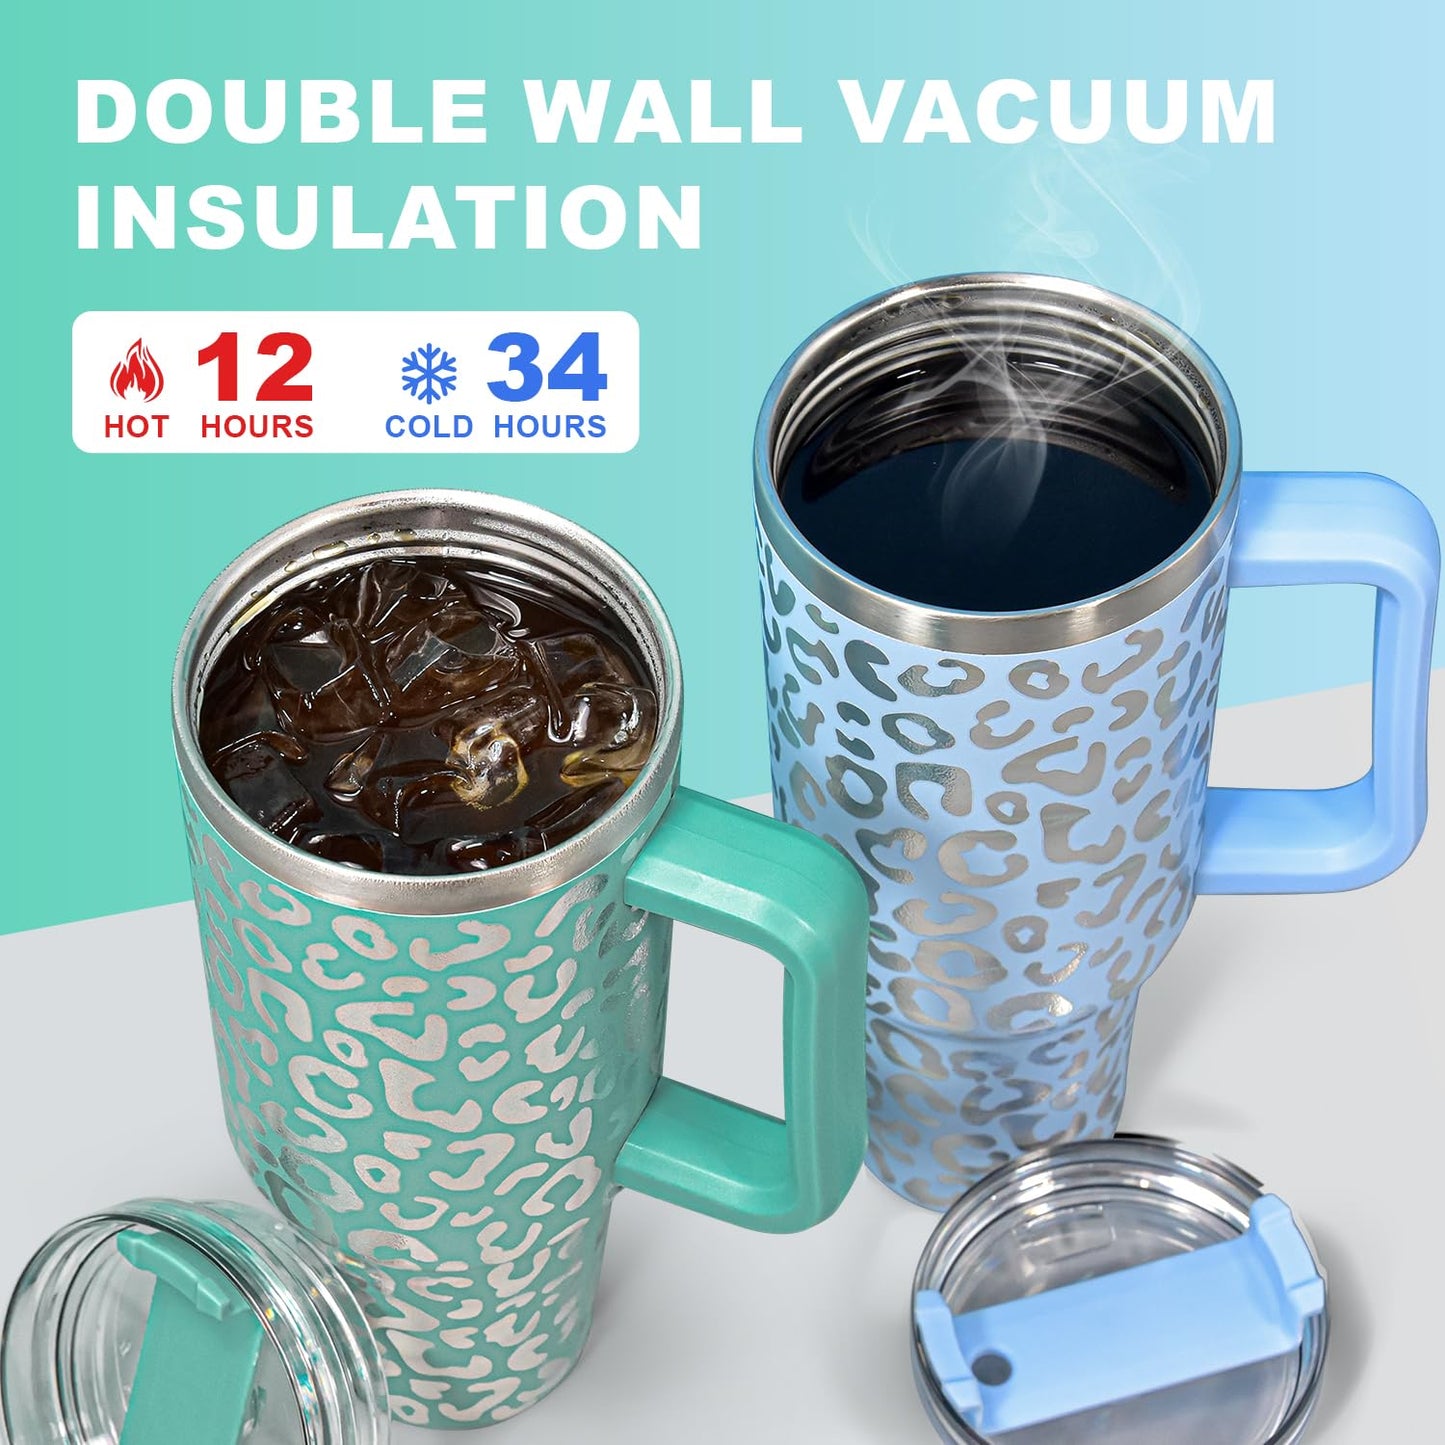 FECBK 40 oz Tumbler with Handle and Straw, 100% Leak-Proof Travel Mug, Stainless Steel Double Wall Vacuum Insulated Coffee Cup Keeps Cold For 34